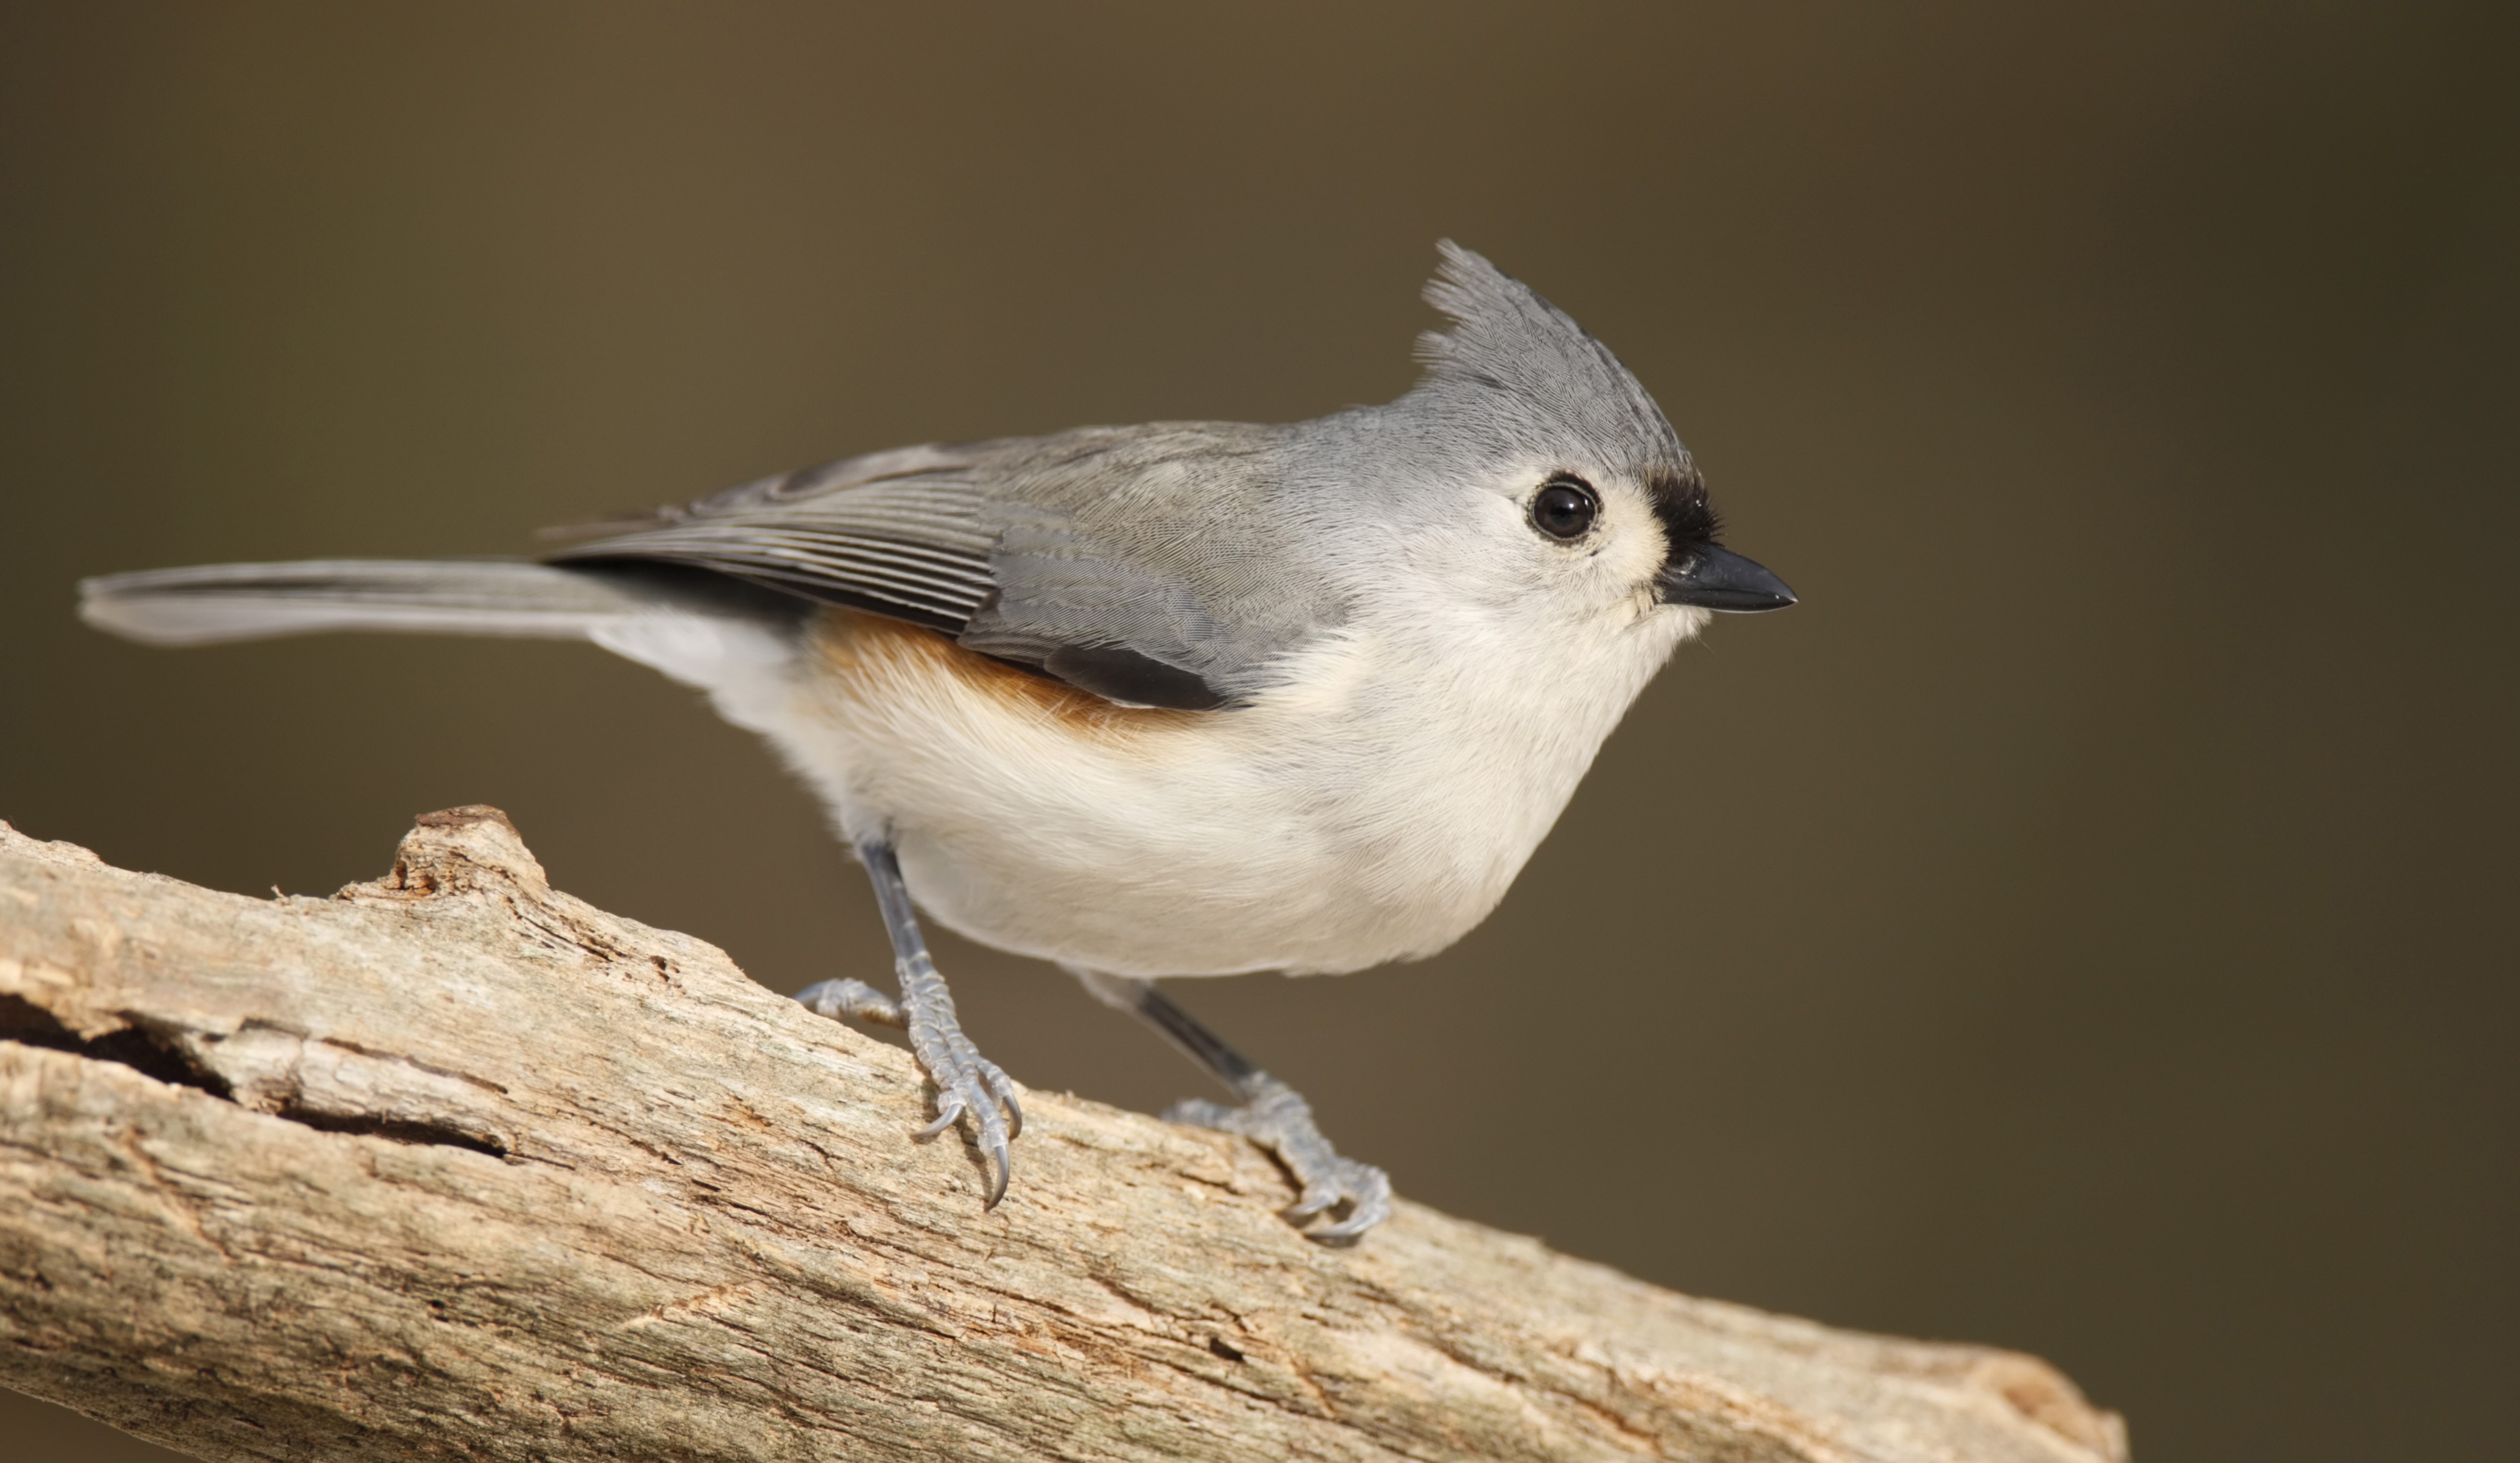 A tufted titmouse on a branch.